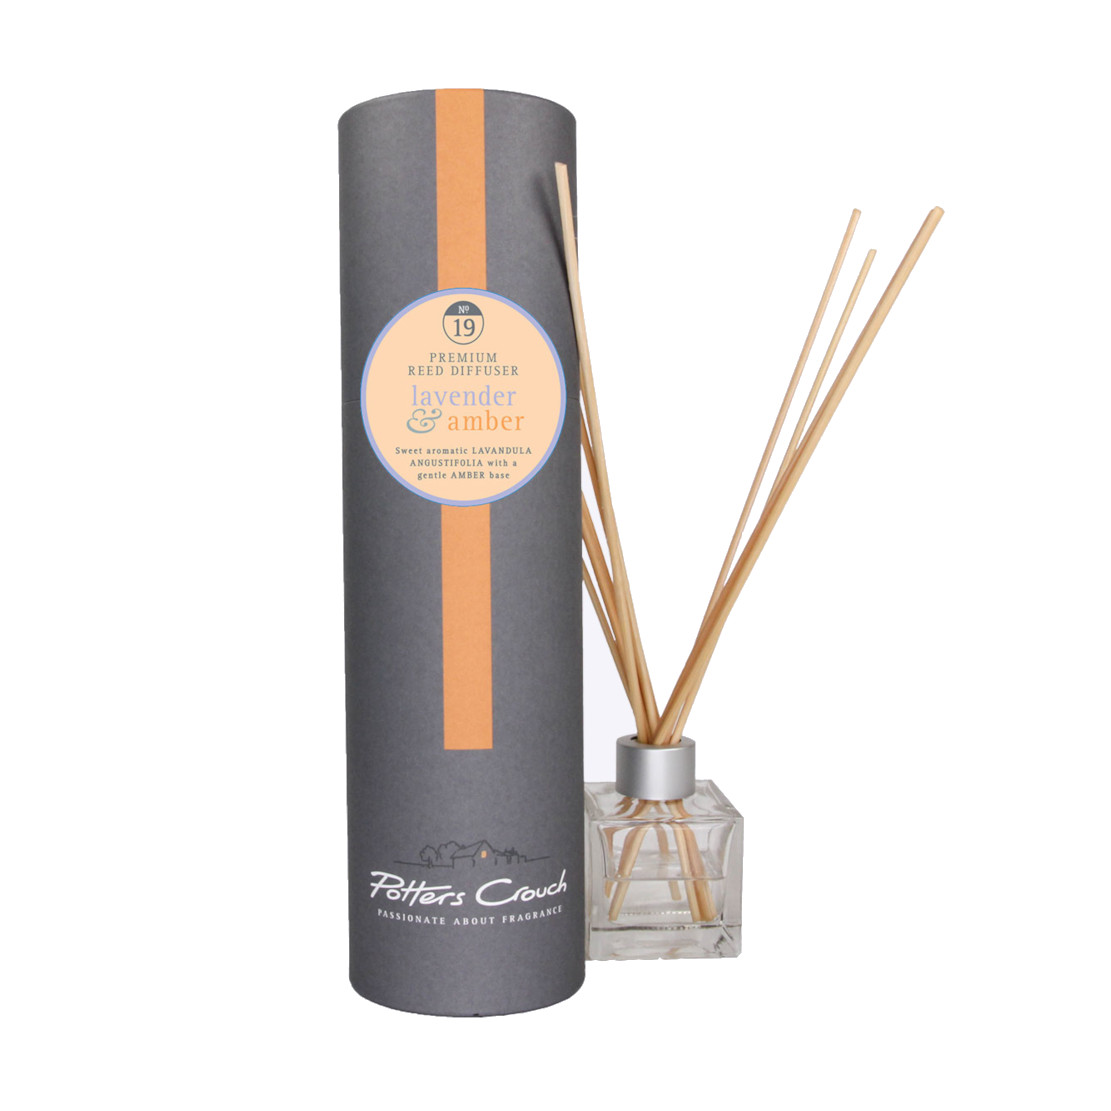 Potters Crouch Lavender and Amber Diffuser